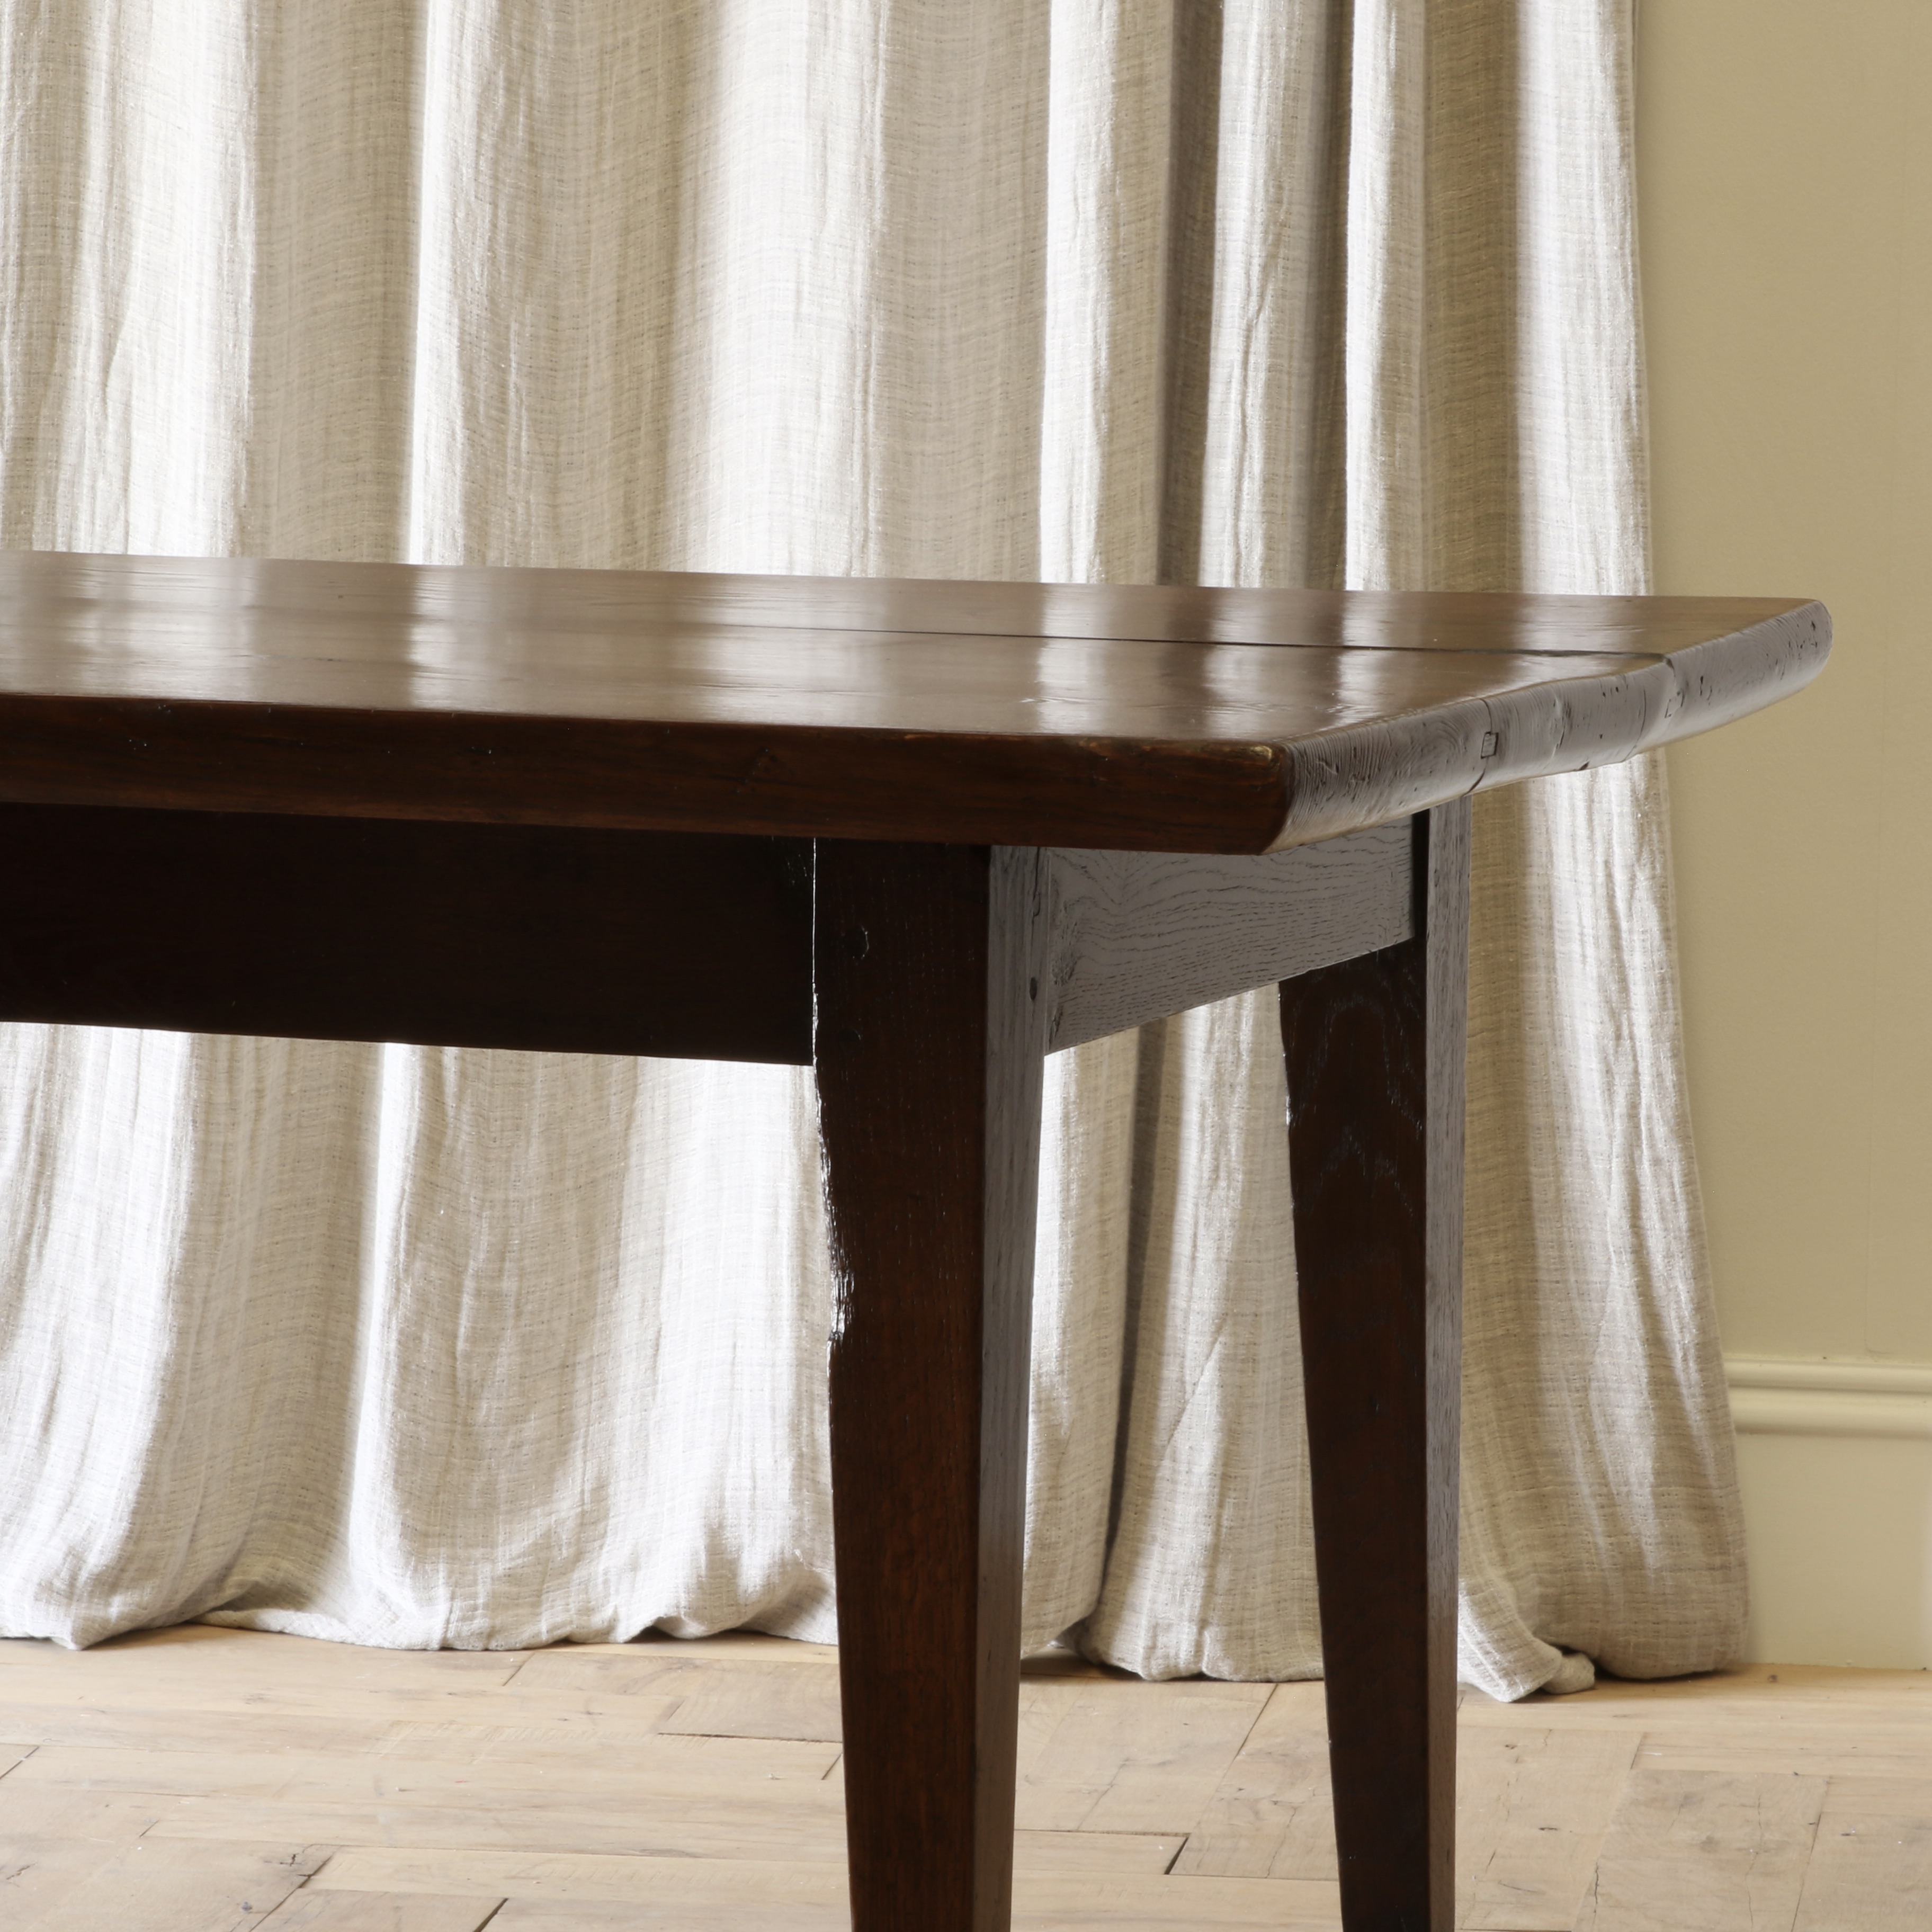 French Provincial Dining Table // Length 2.1m